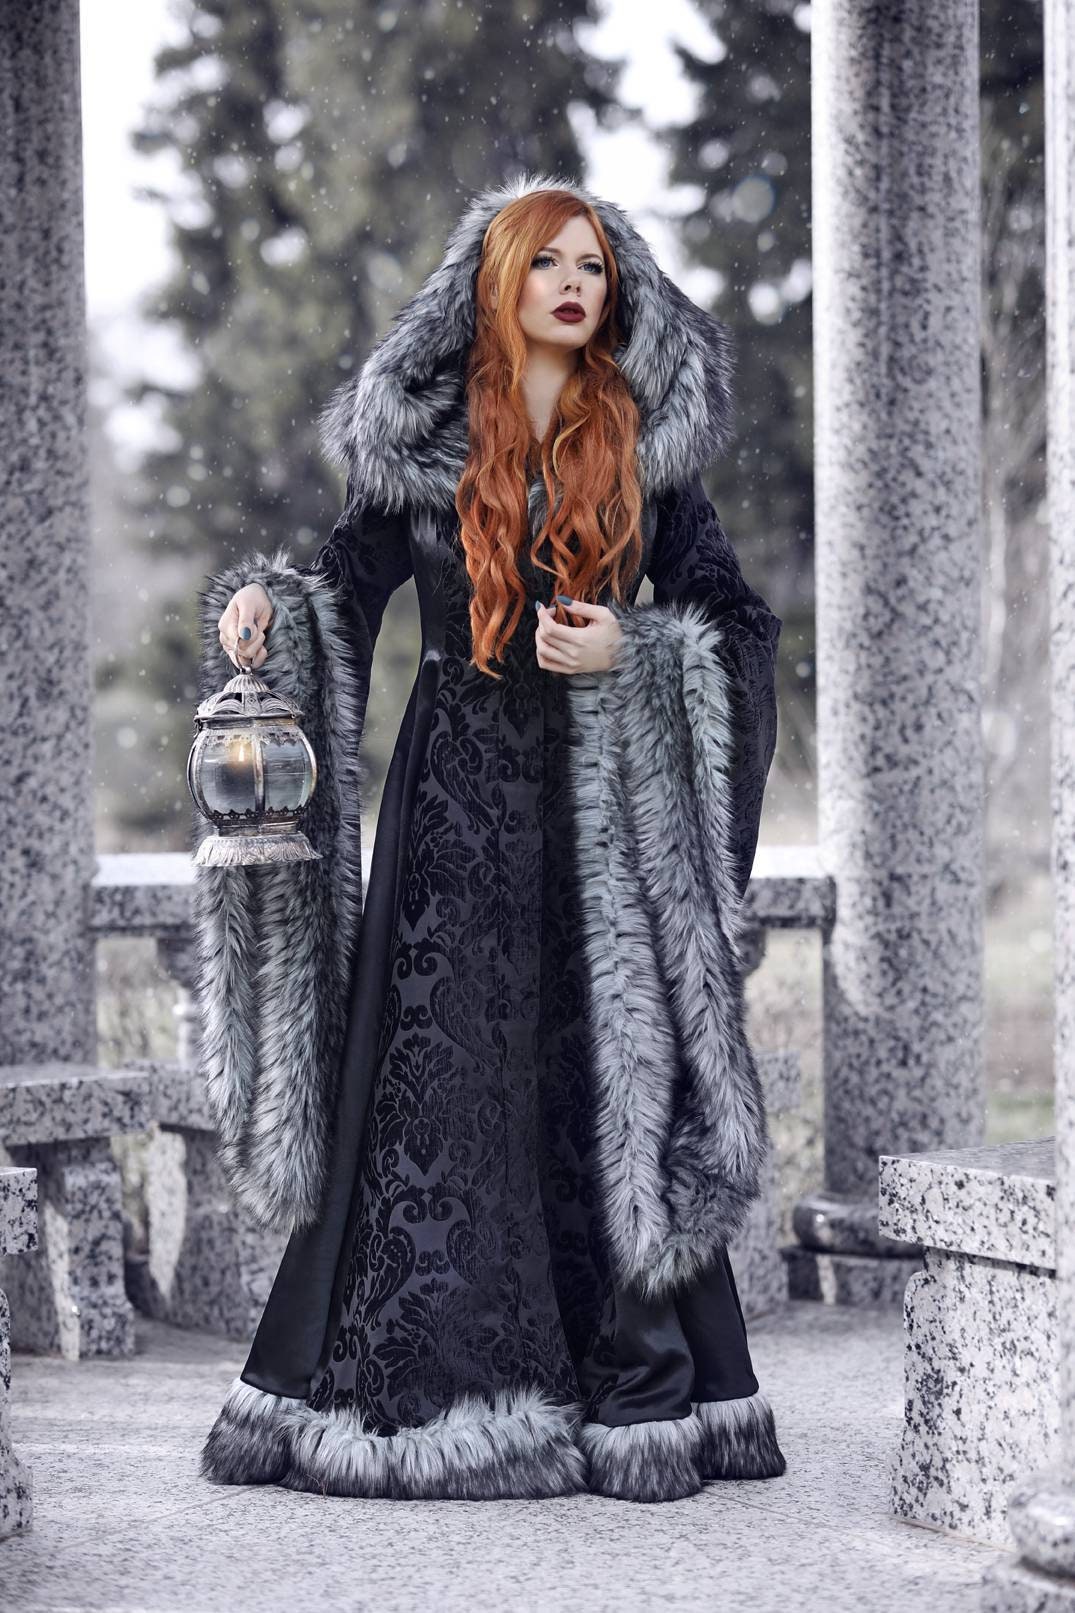 Goth Viking Queen Wedding Dress With ...